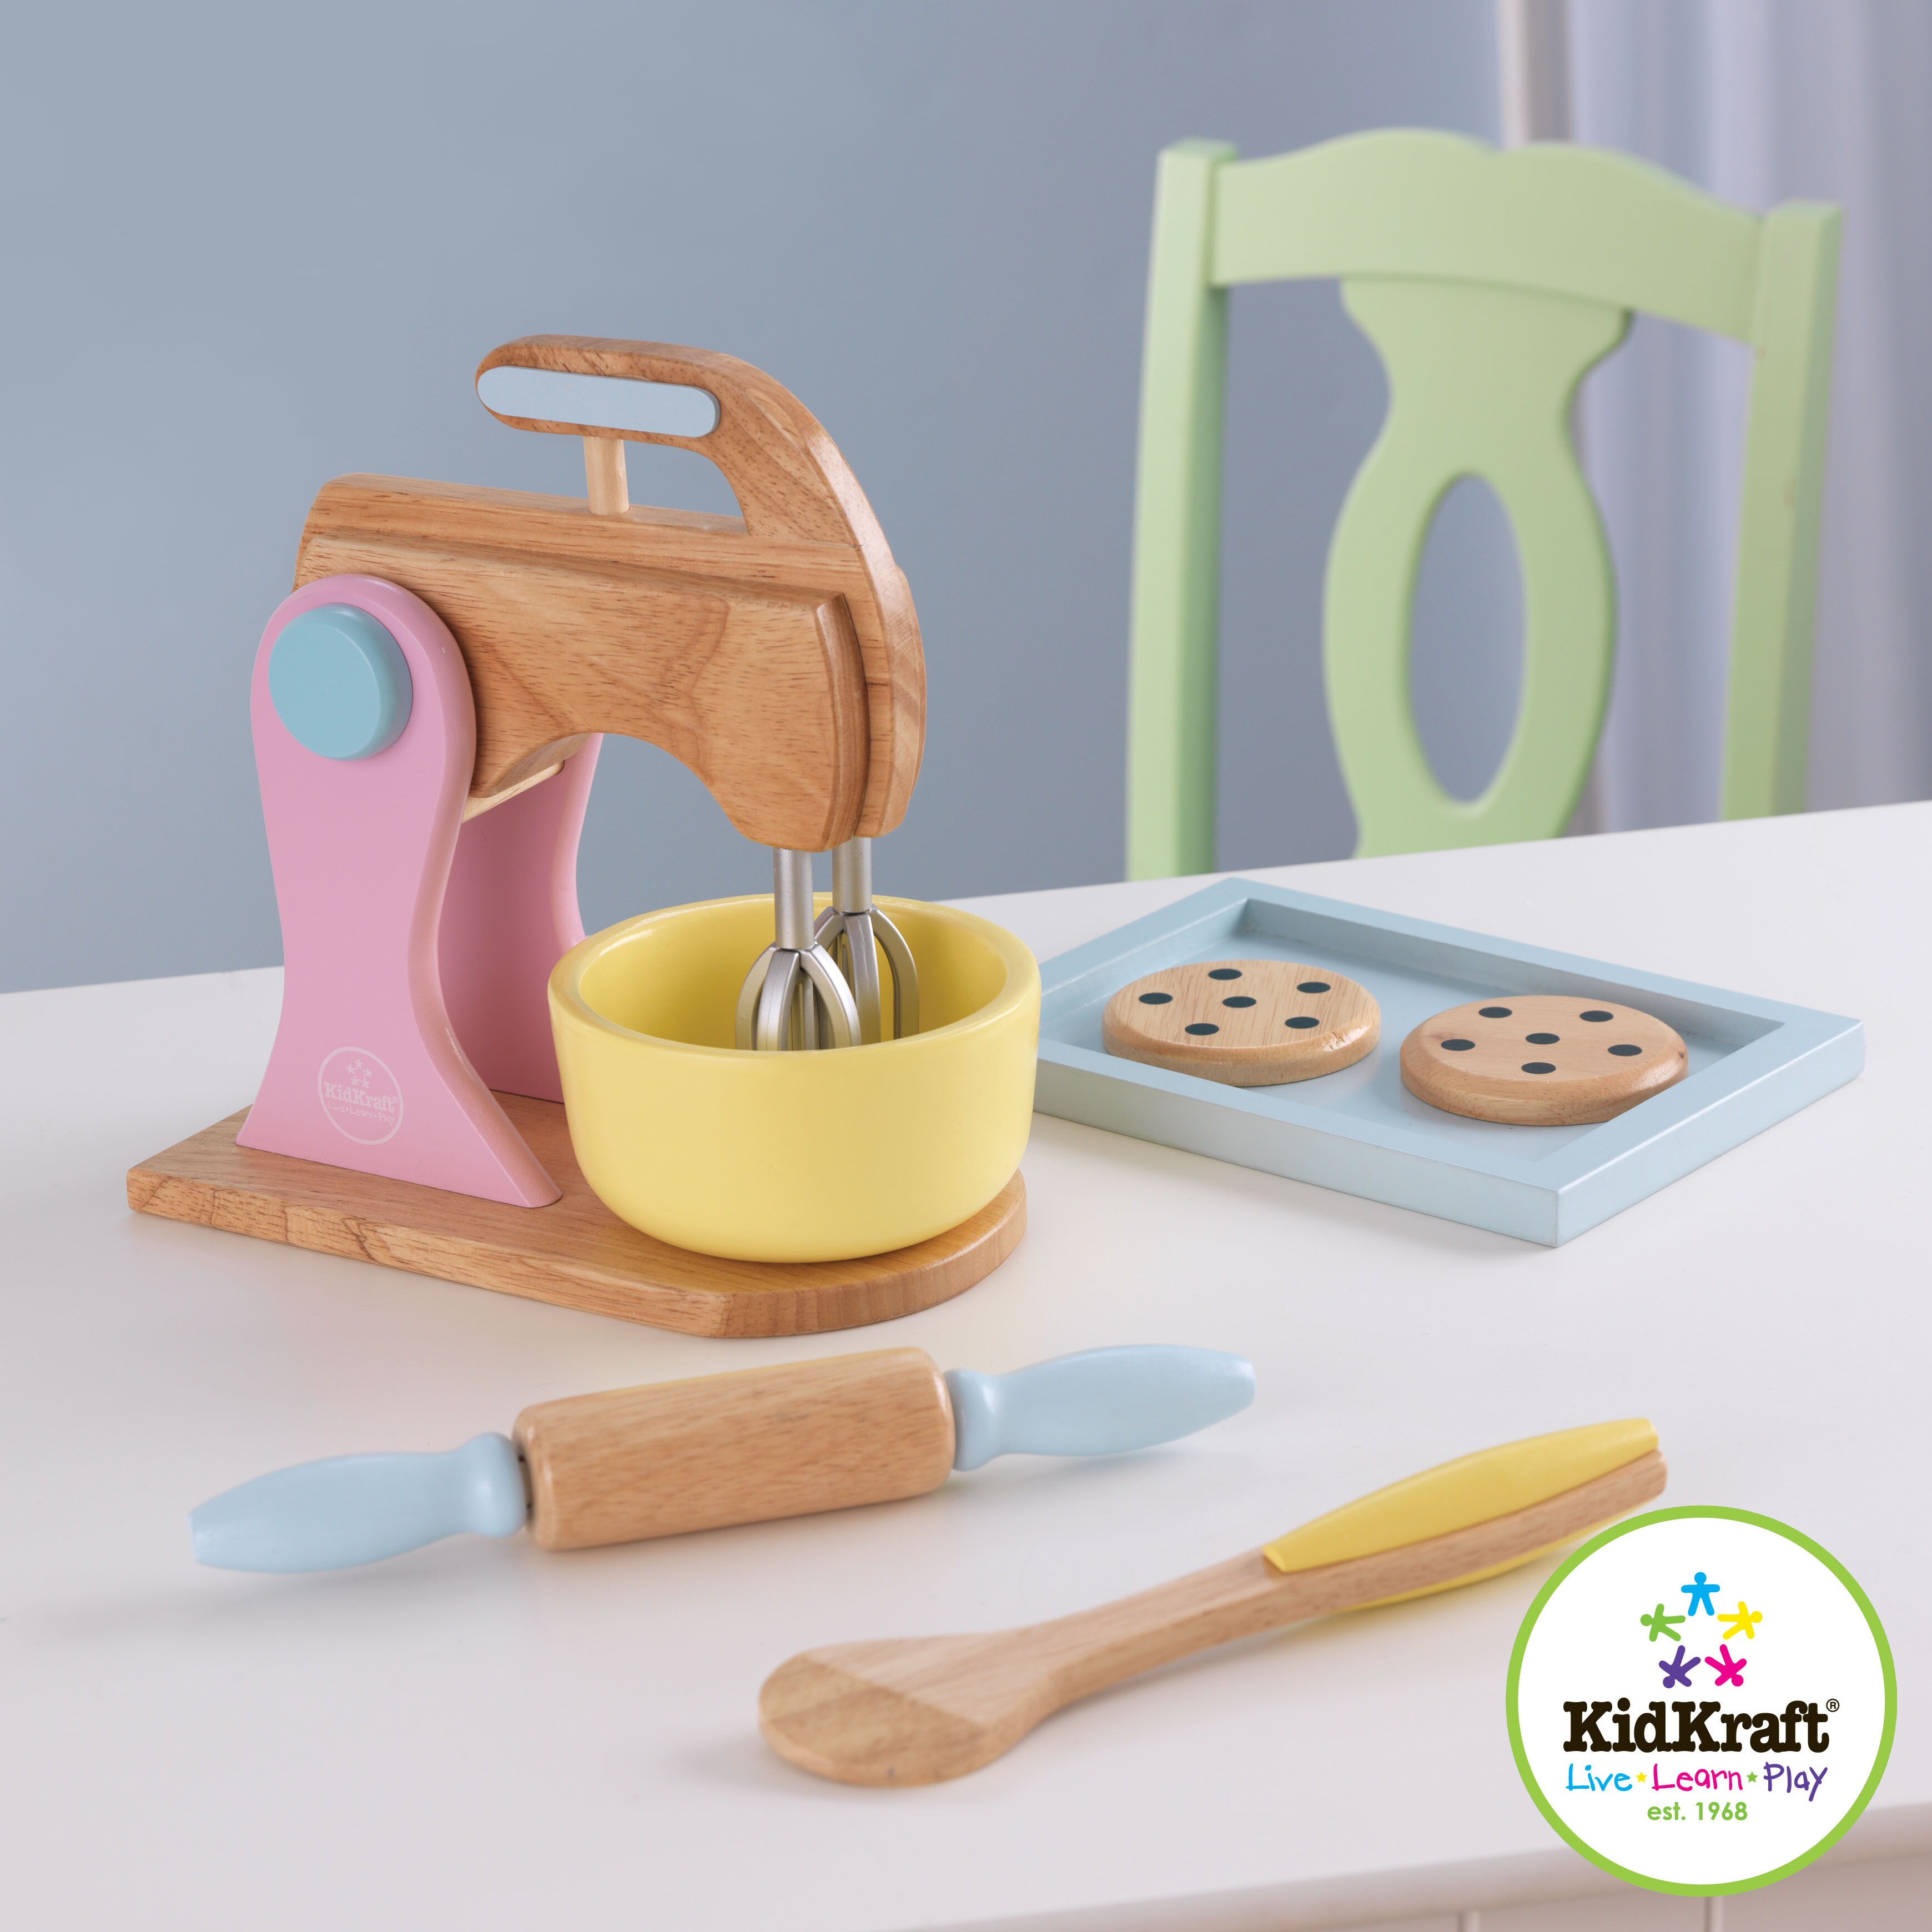 https://ak1.ostkcdn.com/images/products/7179400/KidKraft-Pastel-Cookie-Baking-Set-with-Rolling-Pin-and-Mixer-e83b362d-d809-47d7-90f6-f71987946401.jpg